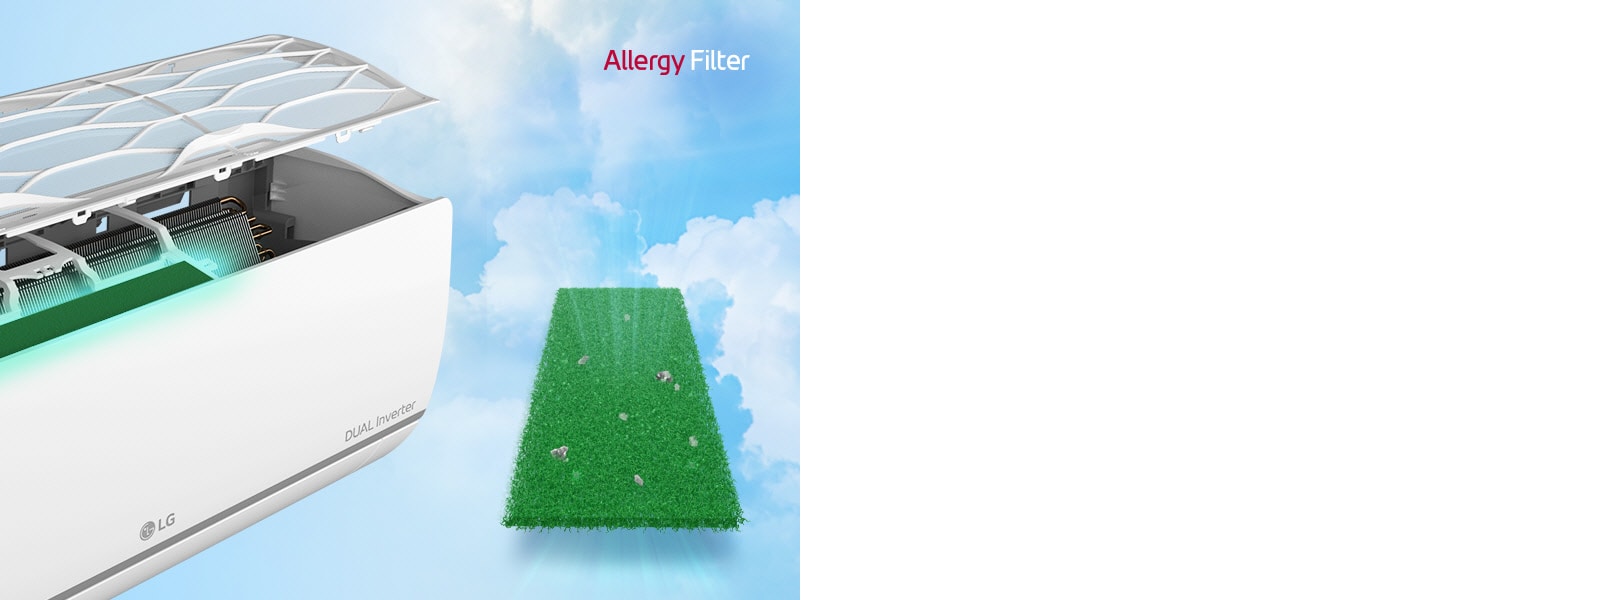 The side angle of the air conditioner is shown with the filters floating above to show the allergy filter installed inside. Beside the machine is the entire green allergy filter with dust mites caught in it. The Allergy Filter logo is in the upper right corner.